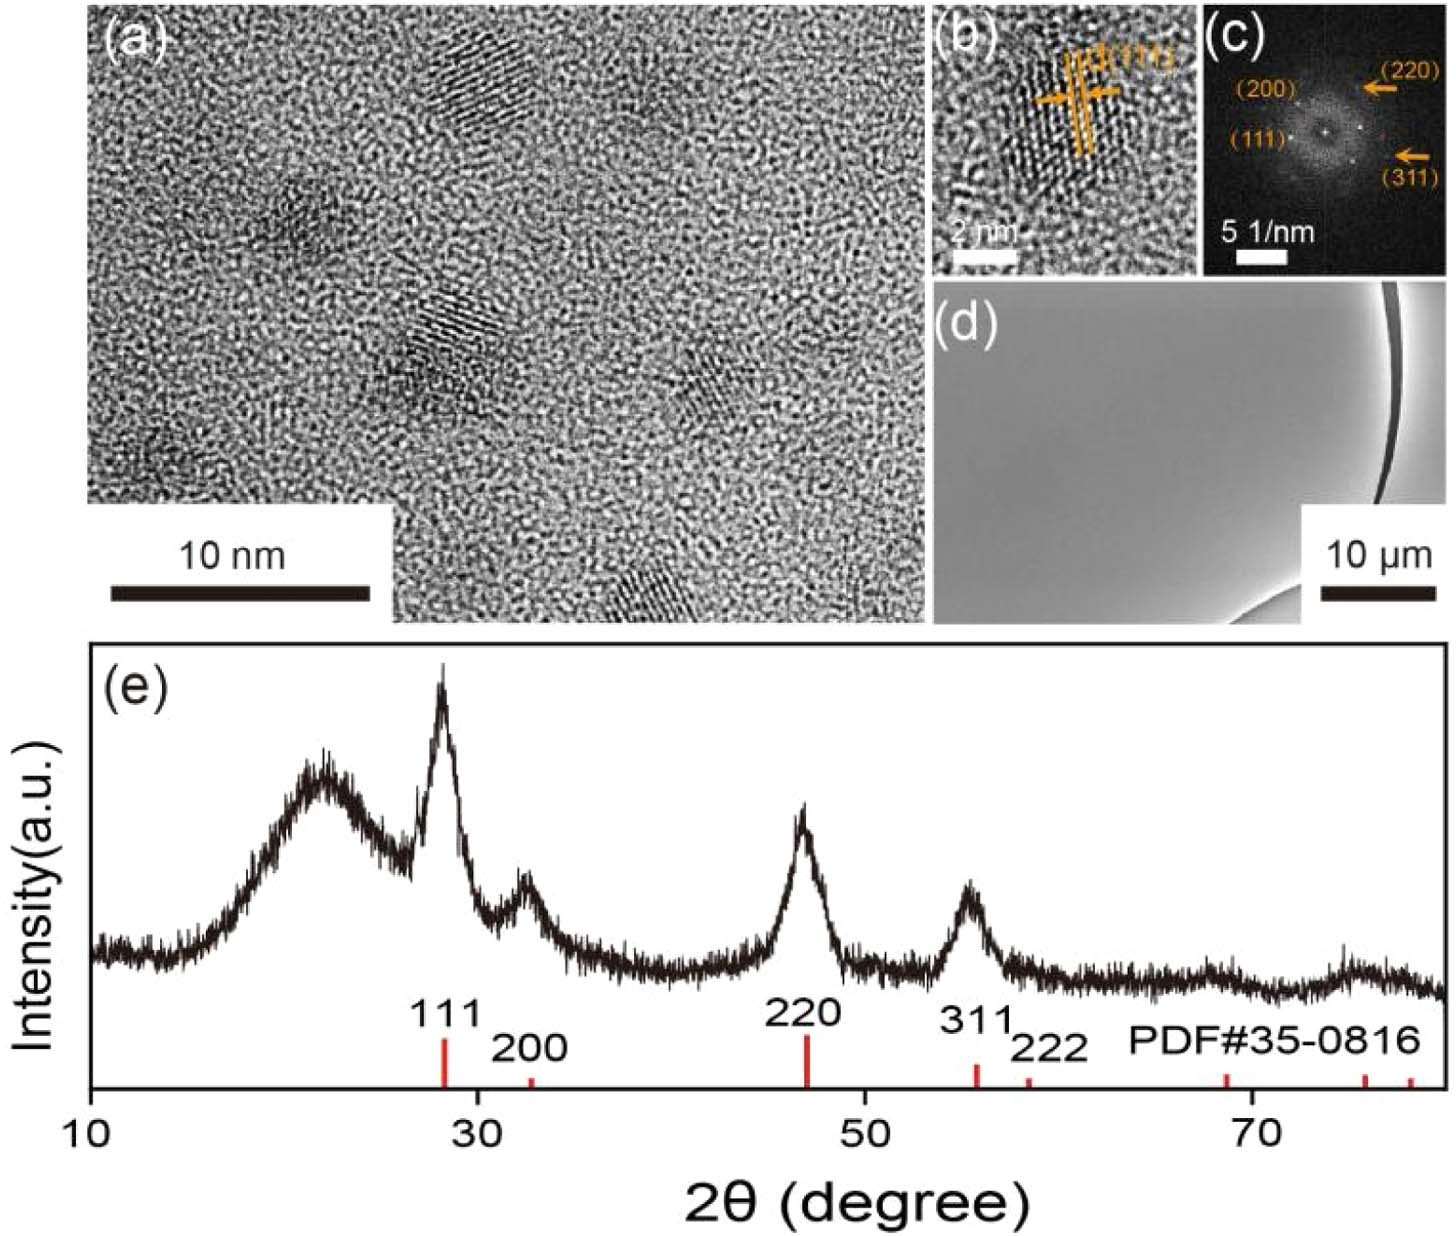 Characterization of CaF2:Yb35Tm1.5Er0.5-SiO2 film. (a) TEM image, (b) HRTEM image, and (c) FFT pattern of (b). (d) Top view SEM image of the synthesized glass film. (e) XRD spectrum.